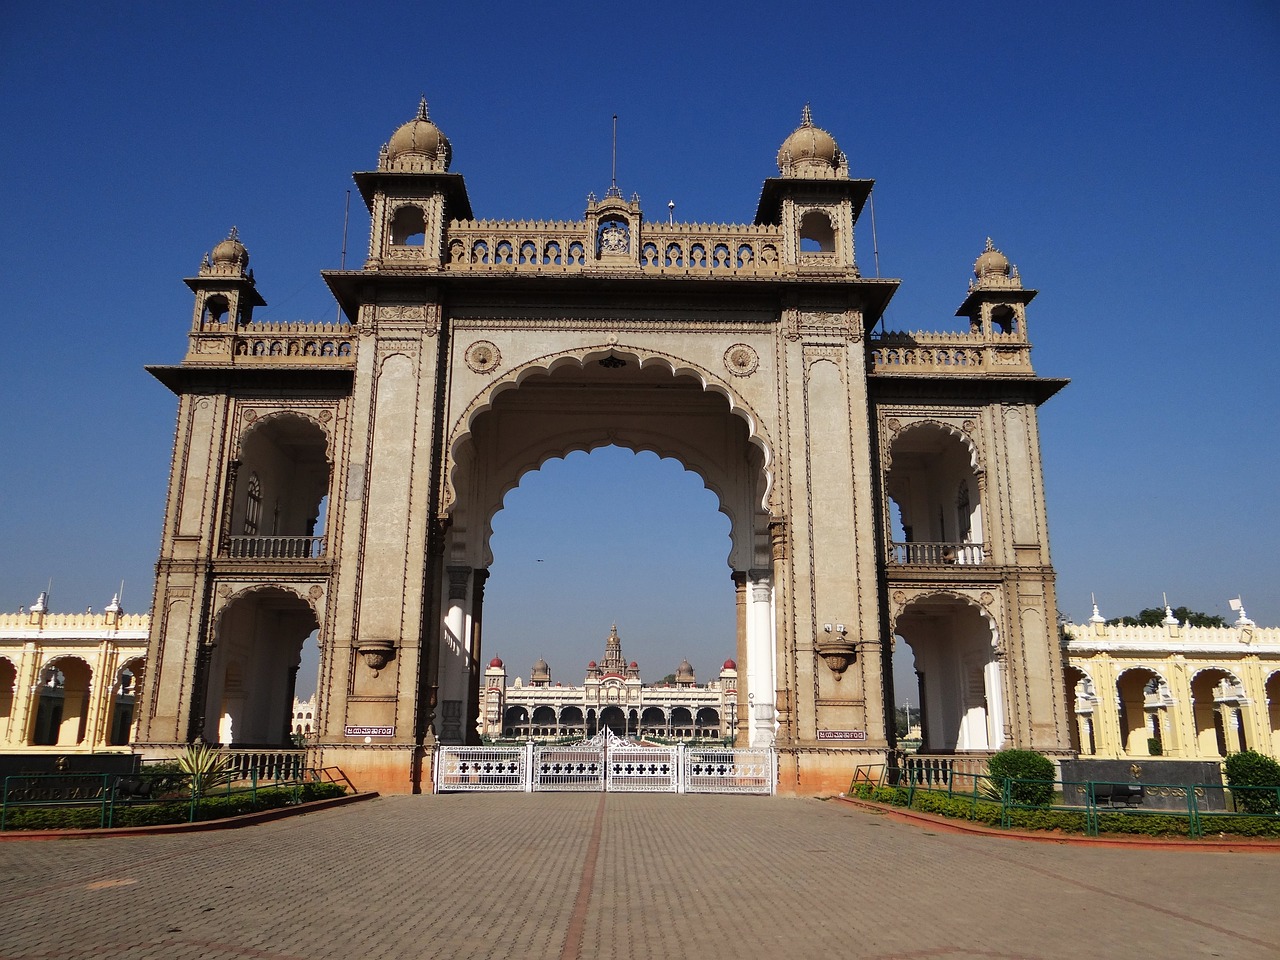 Royal Mysore: Palaces, Gardens, and Local Markets